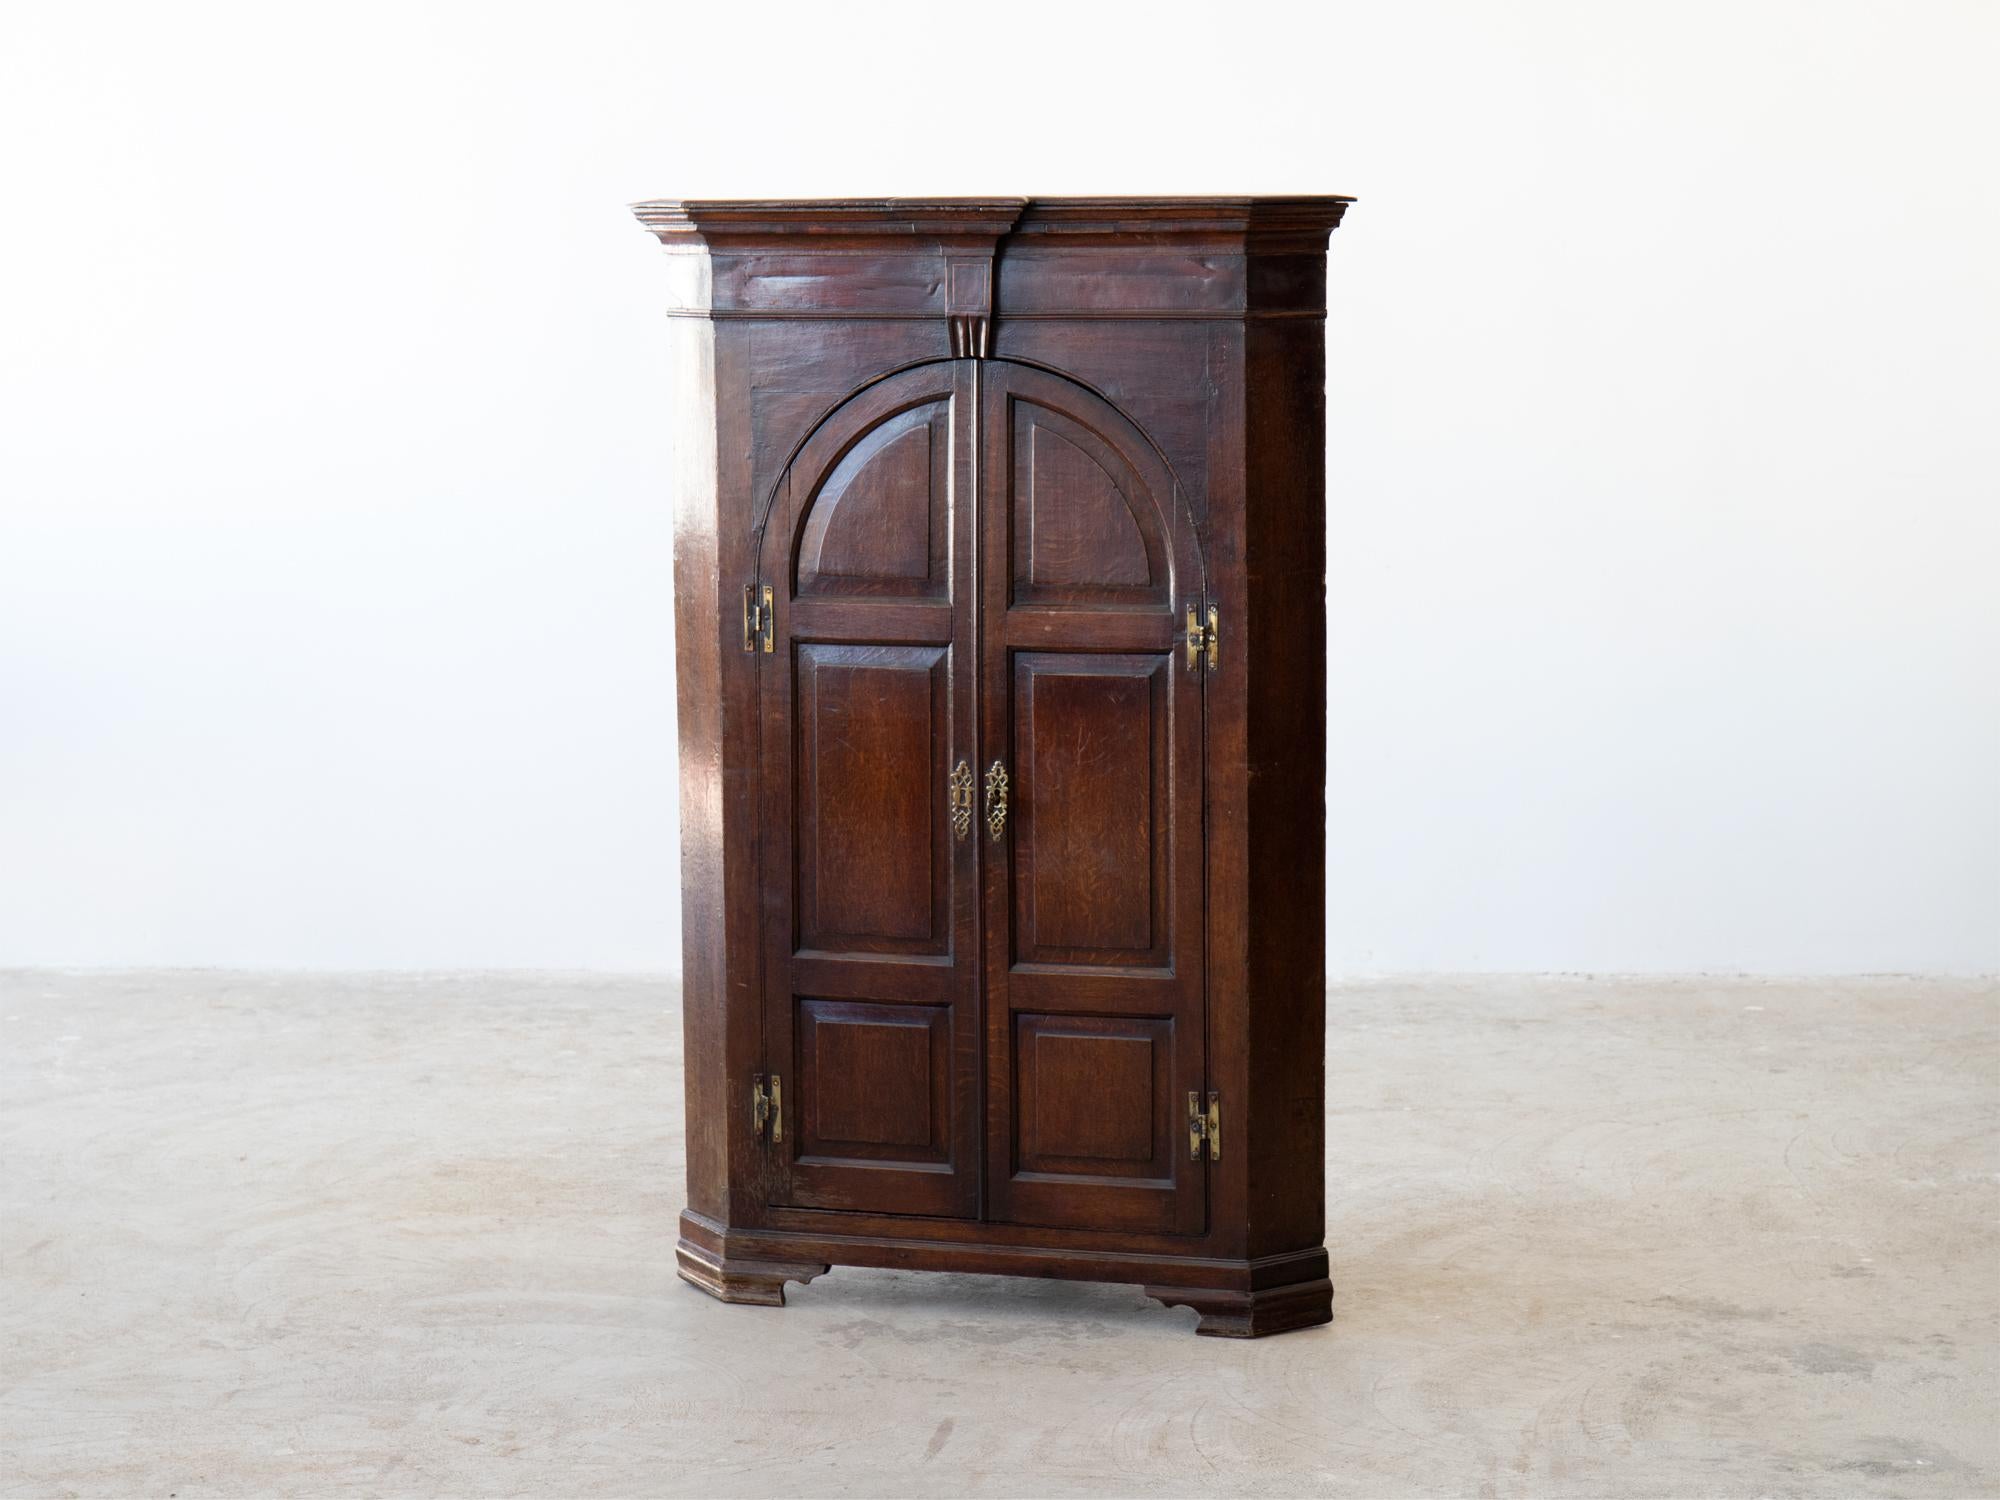 A freestanding Georgian oak corner cupboard.

English, circa 1770.

A charming gothic influence to the arched panelled doors, opening to reveal three shaped shelves above two small drawers.

In excellent order. Superb colour and patina to the aged